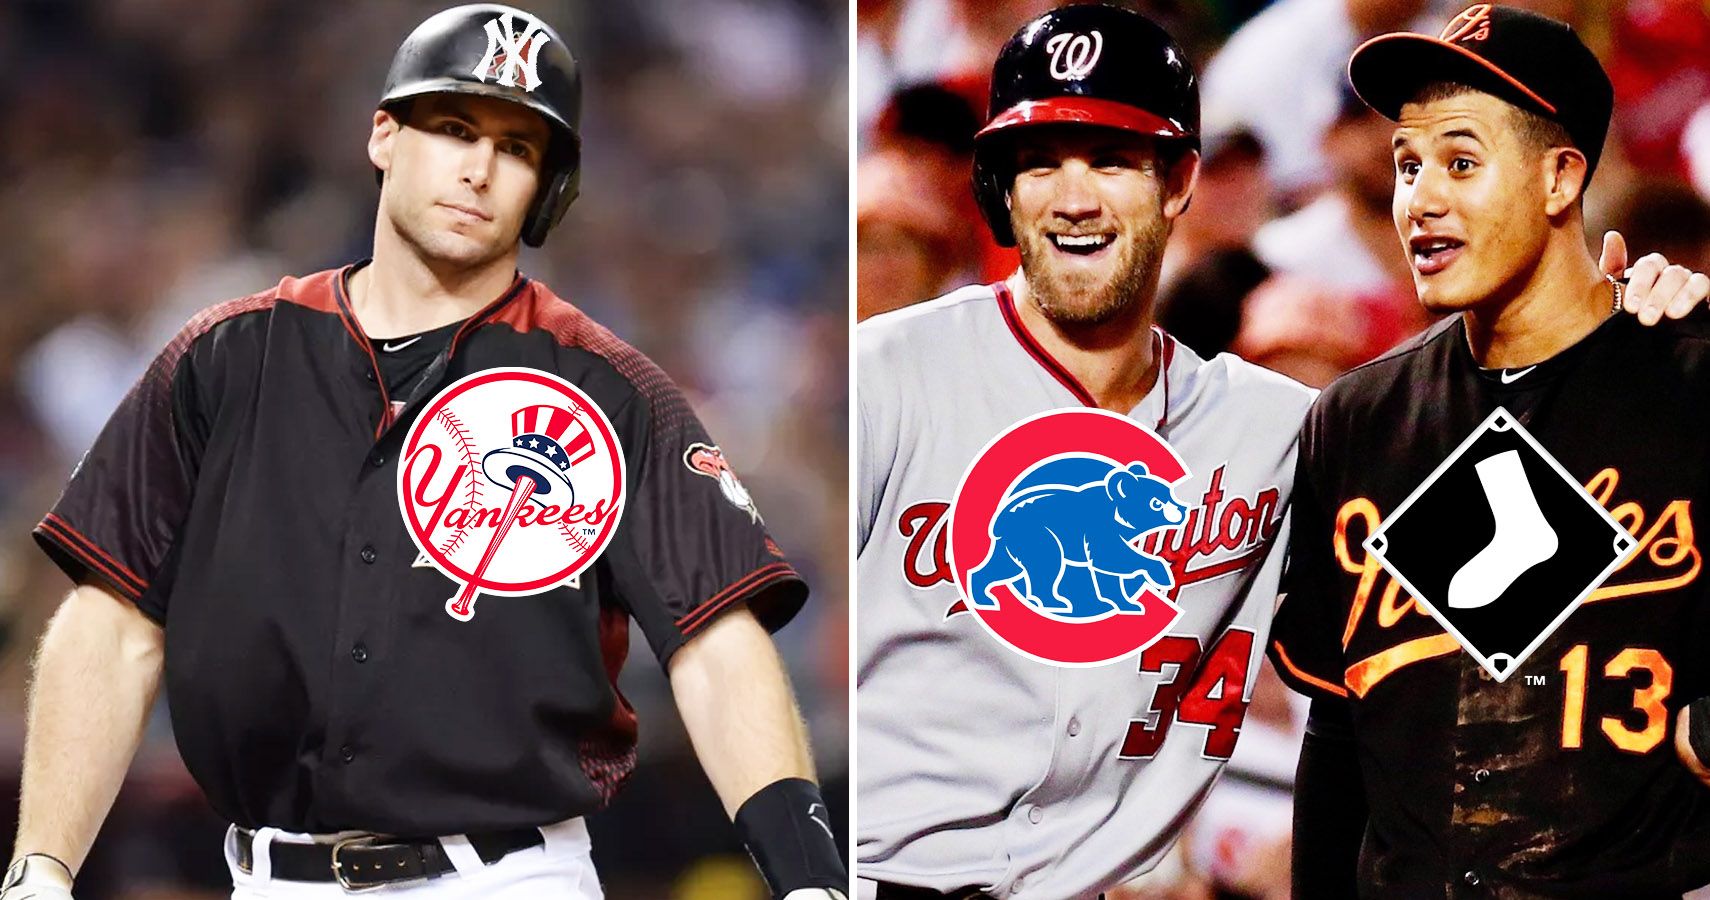 Projecting Where The Top 12 MLB Free Agents This Offseason (And The Top